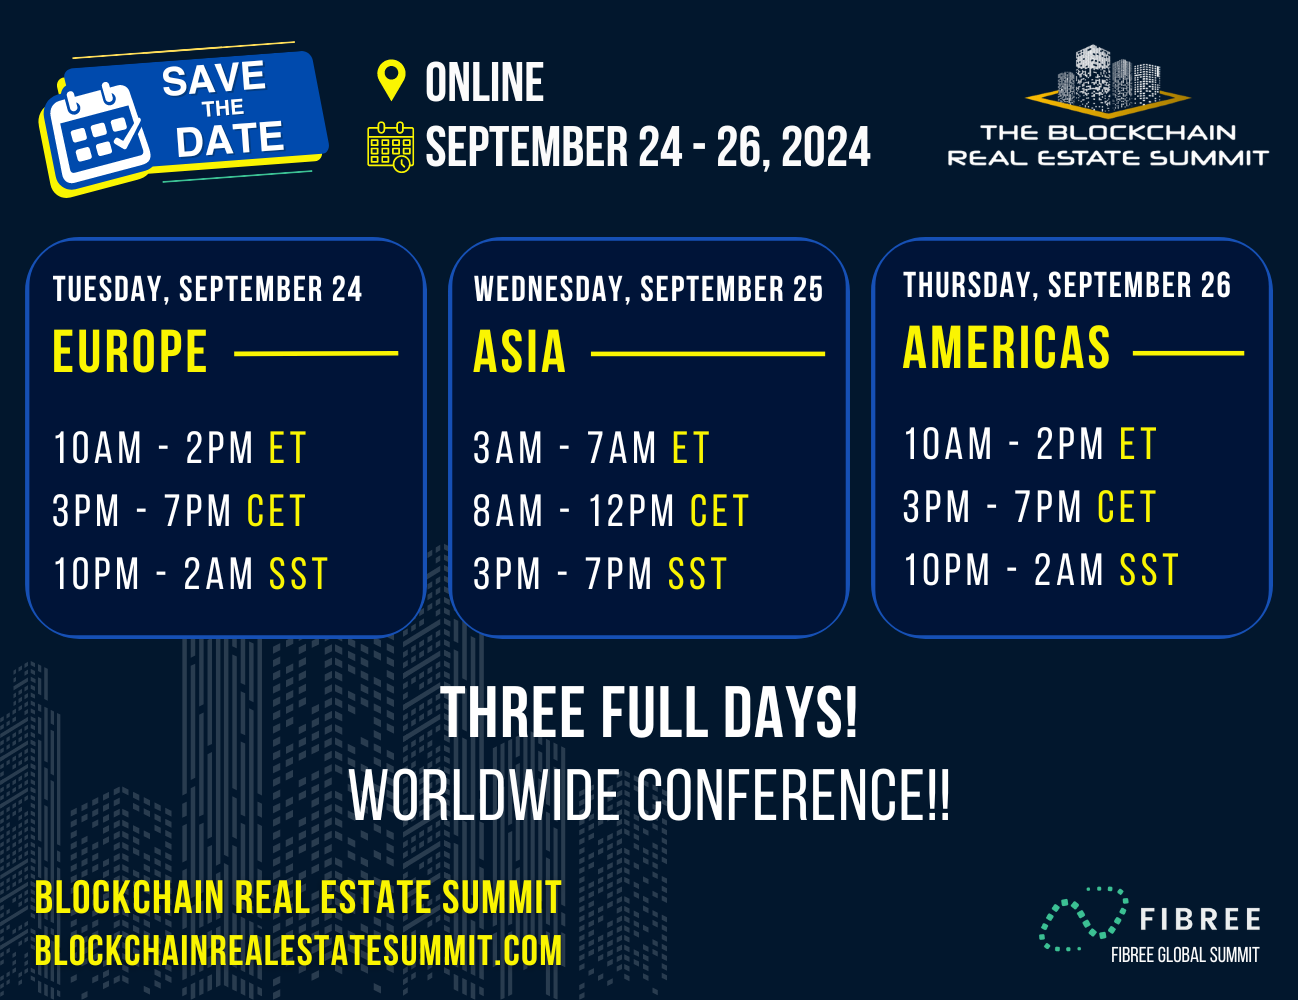 Save the date announcement for Global Blockchain Real Estate Summit 2023 with FIBREE September 24 through 26 online with a chart that displays the times for each day and labels of what time zone the day is made for. Europe focus on Tuesday September 24, 2024: 10 AM-2PM ET / 3PM-7PM CET / 10PM-2AM SST. Asia Focus on Wednesday September 25, 2024: 3 AM-7AM ET / 8AM-12PM CET / 3PM-7PM SST. Americas time zone on Thursday - September 26, 2024: 10 AM-2PM ET / 3PM-7PM CET / 10PM-2AM SST. THREE FULL DAYS! WORLDWIDE BLOCKCHAIN CONFERENCE!